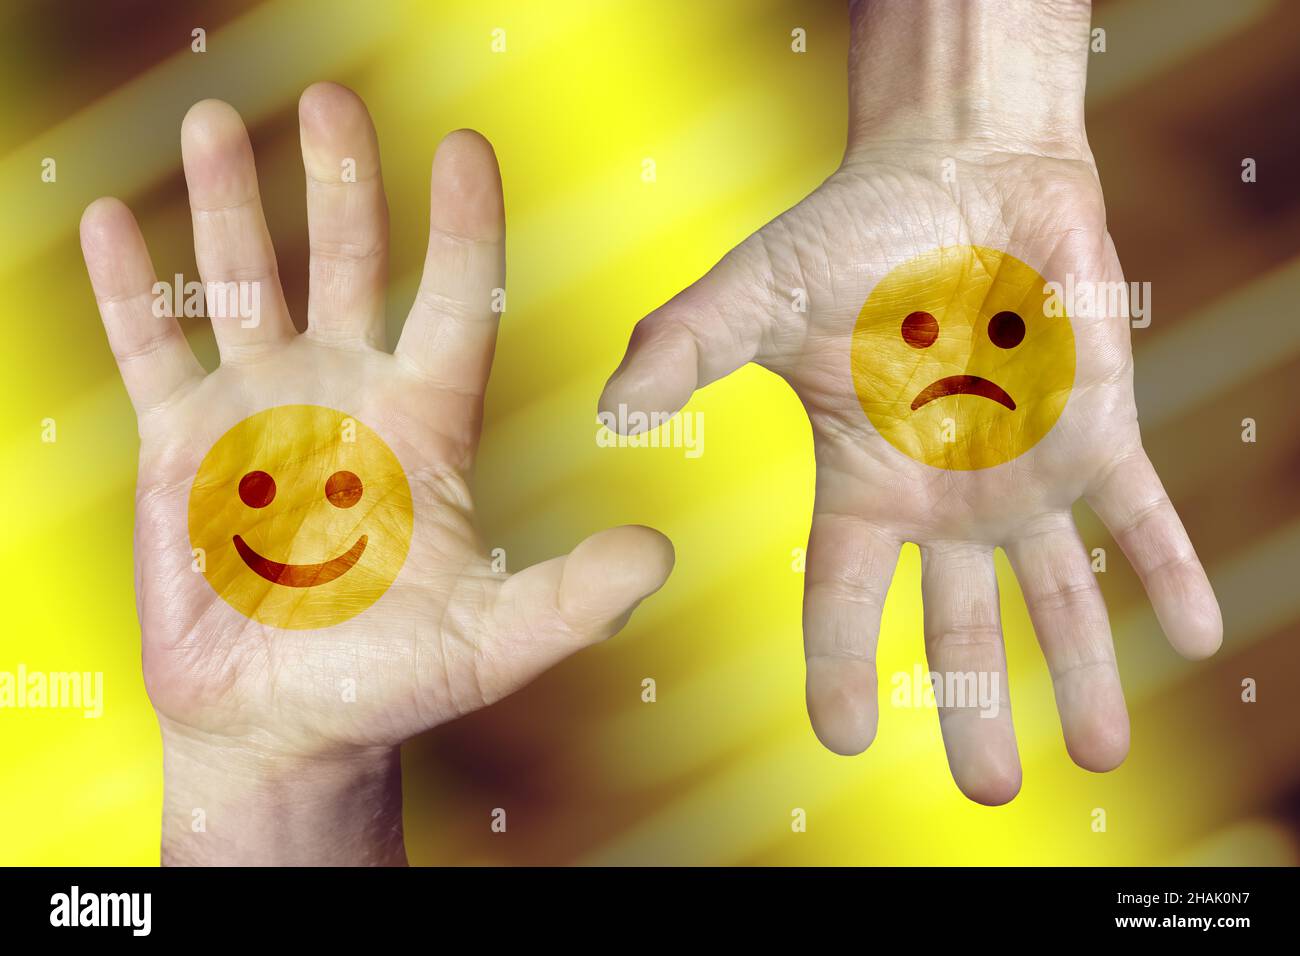 Sad Emoji Face Yellow High Resolution Stock Photography And Images Alamy